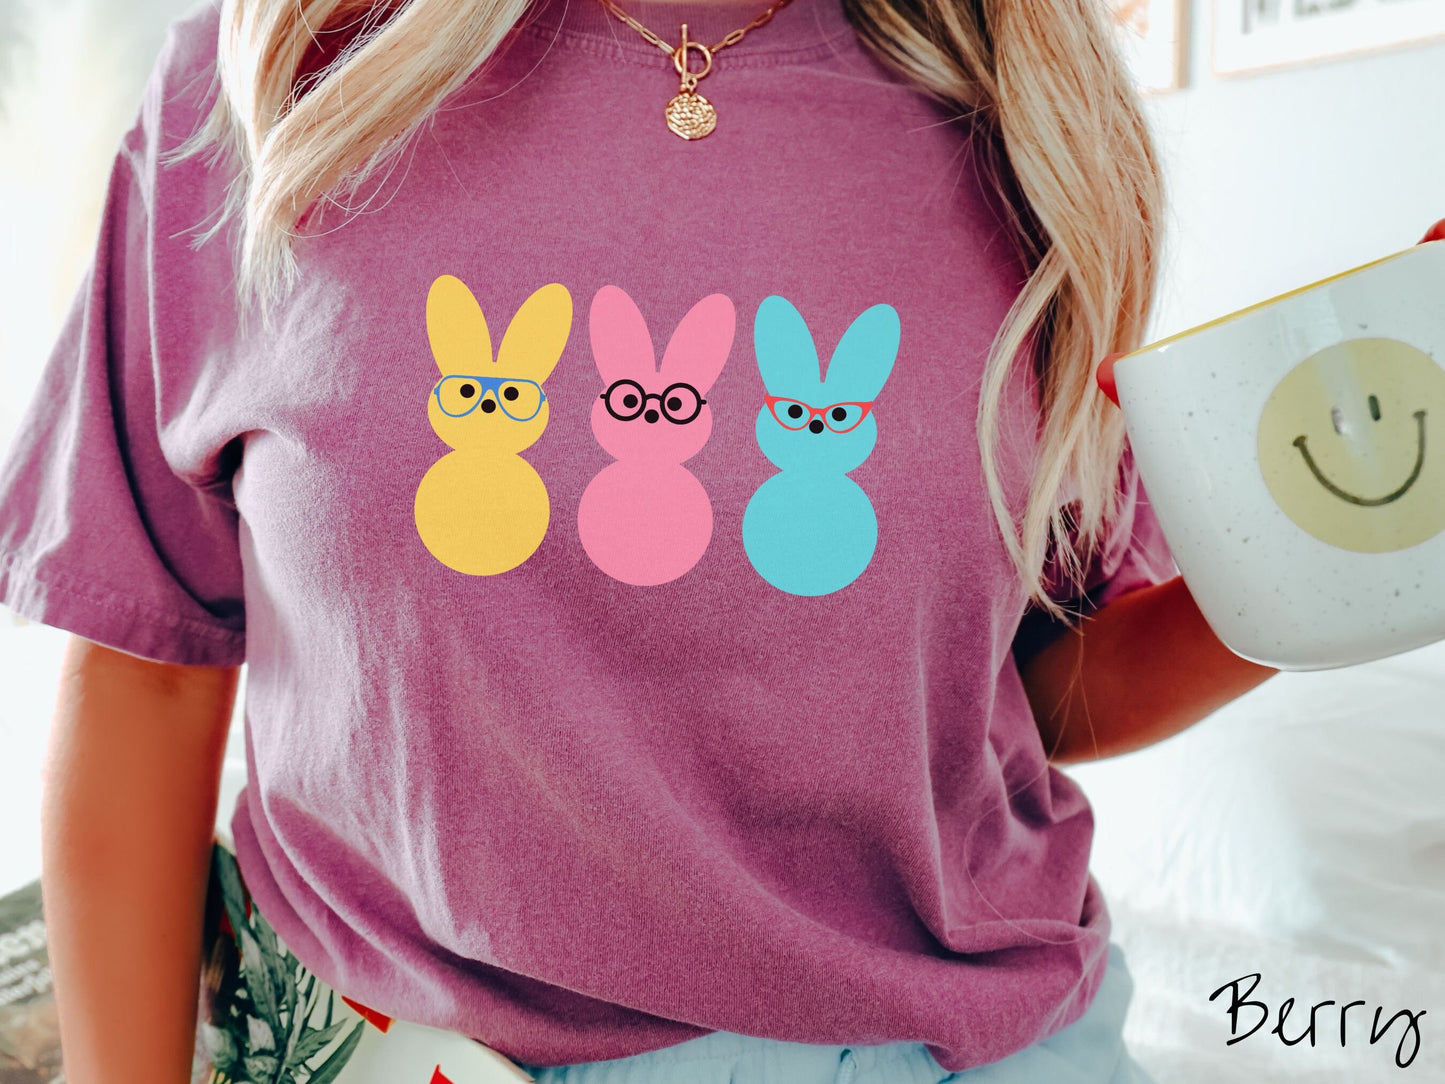 A woman wearing a cute, vintage berry colored shirt with three peep-like rabbits on the front. One is yellow and wearing blue glasses, the middle is pink with black glasses, and the one on the right is light blue with red glasses.